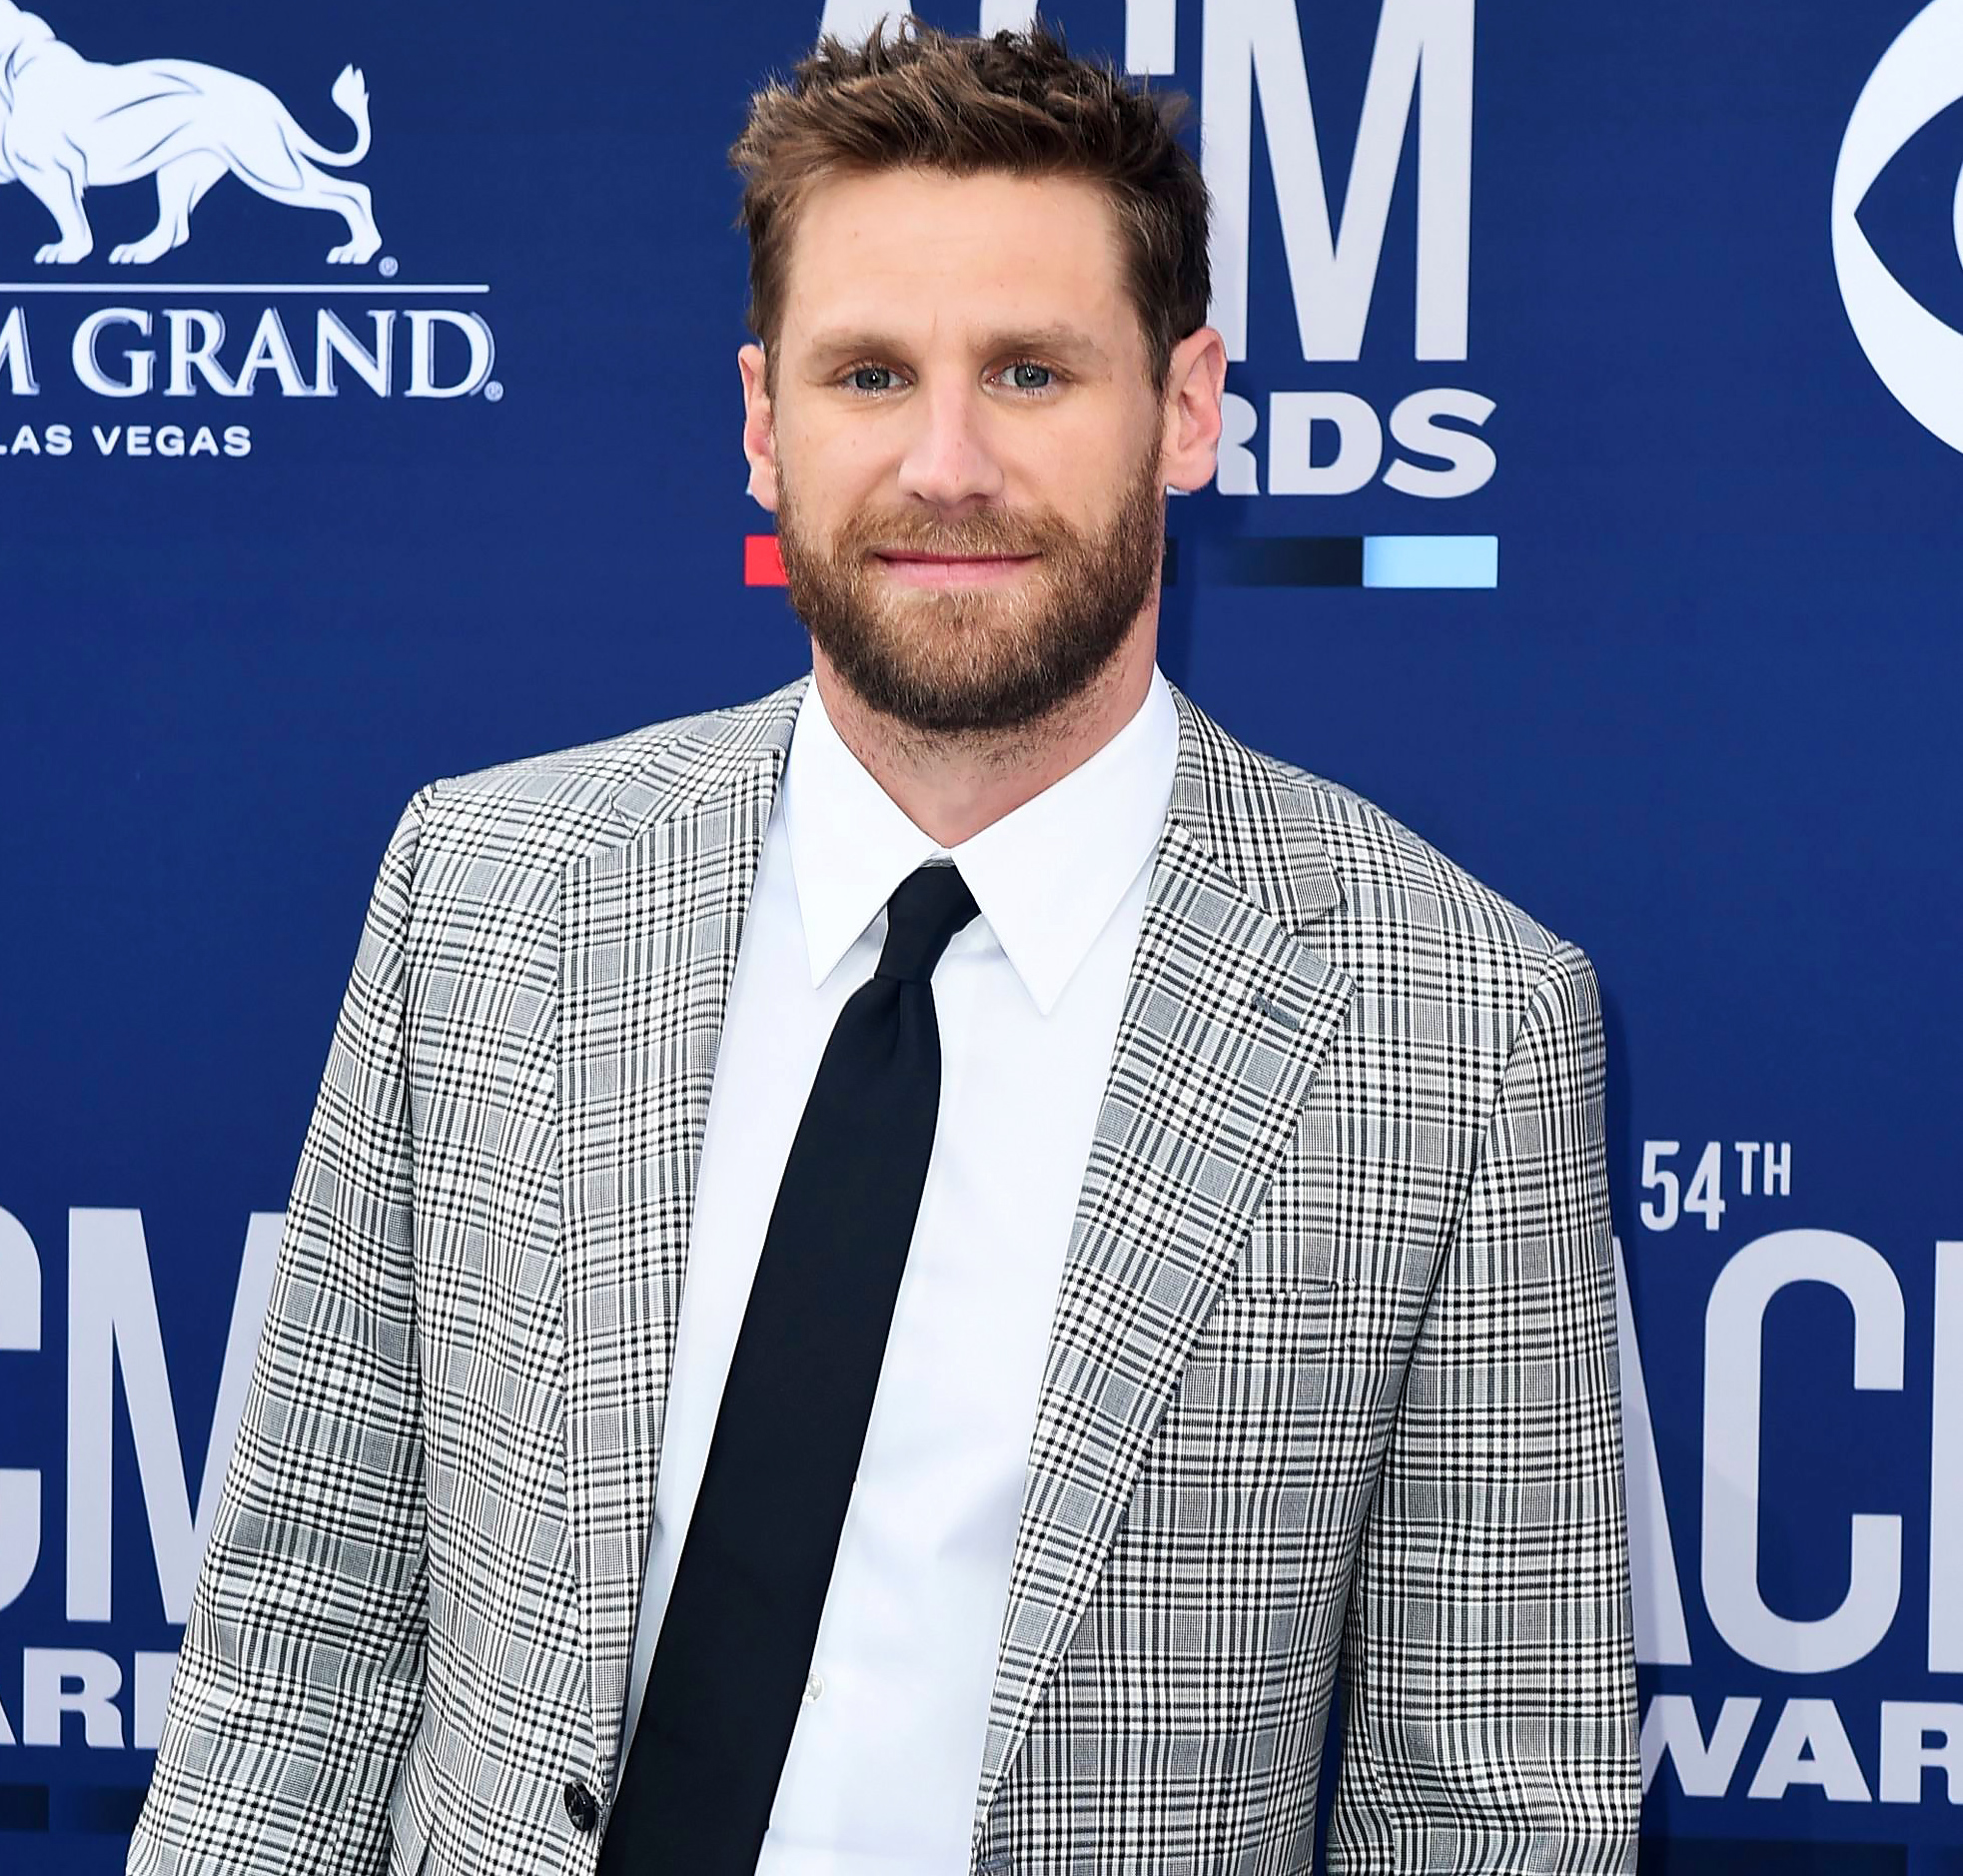 Chase Rice Speaks Out Amid Live Concert Controversy